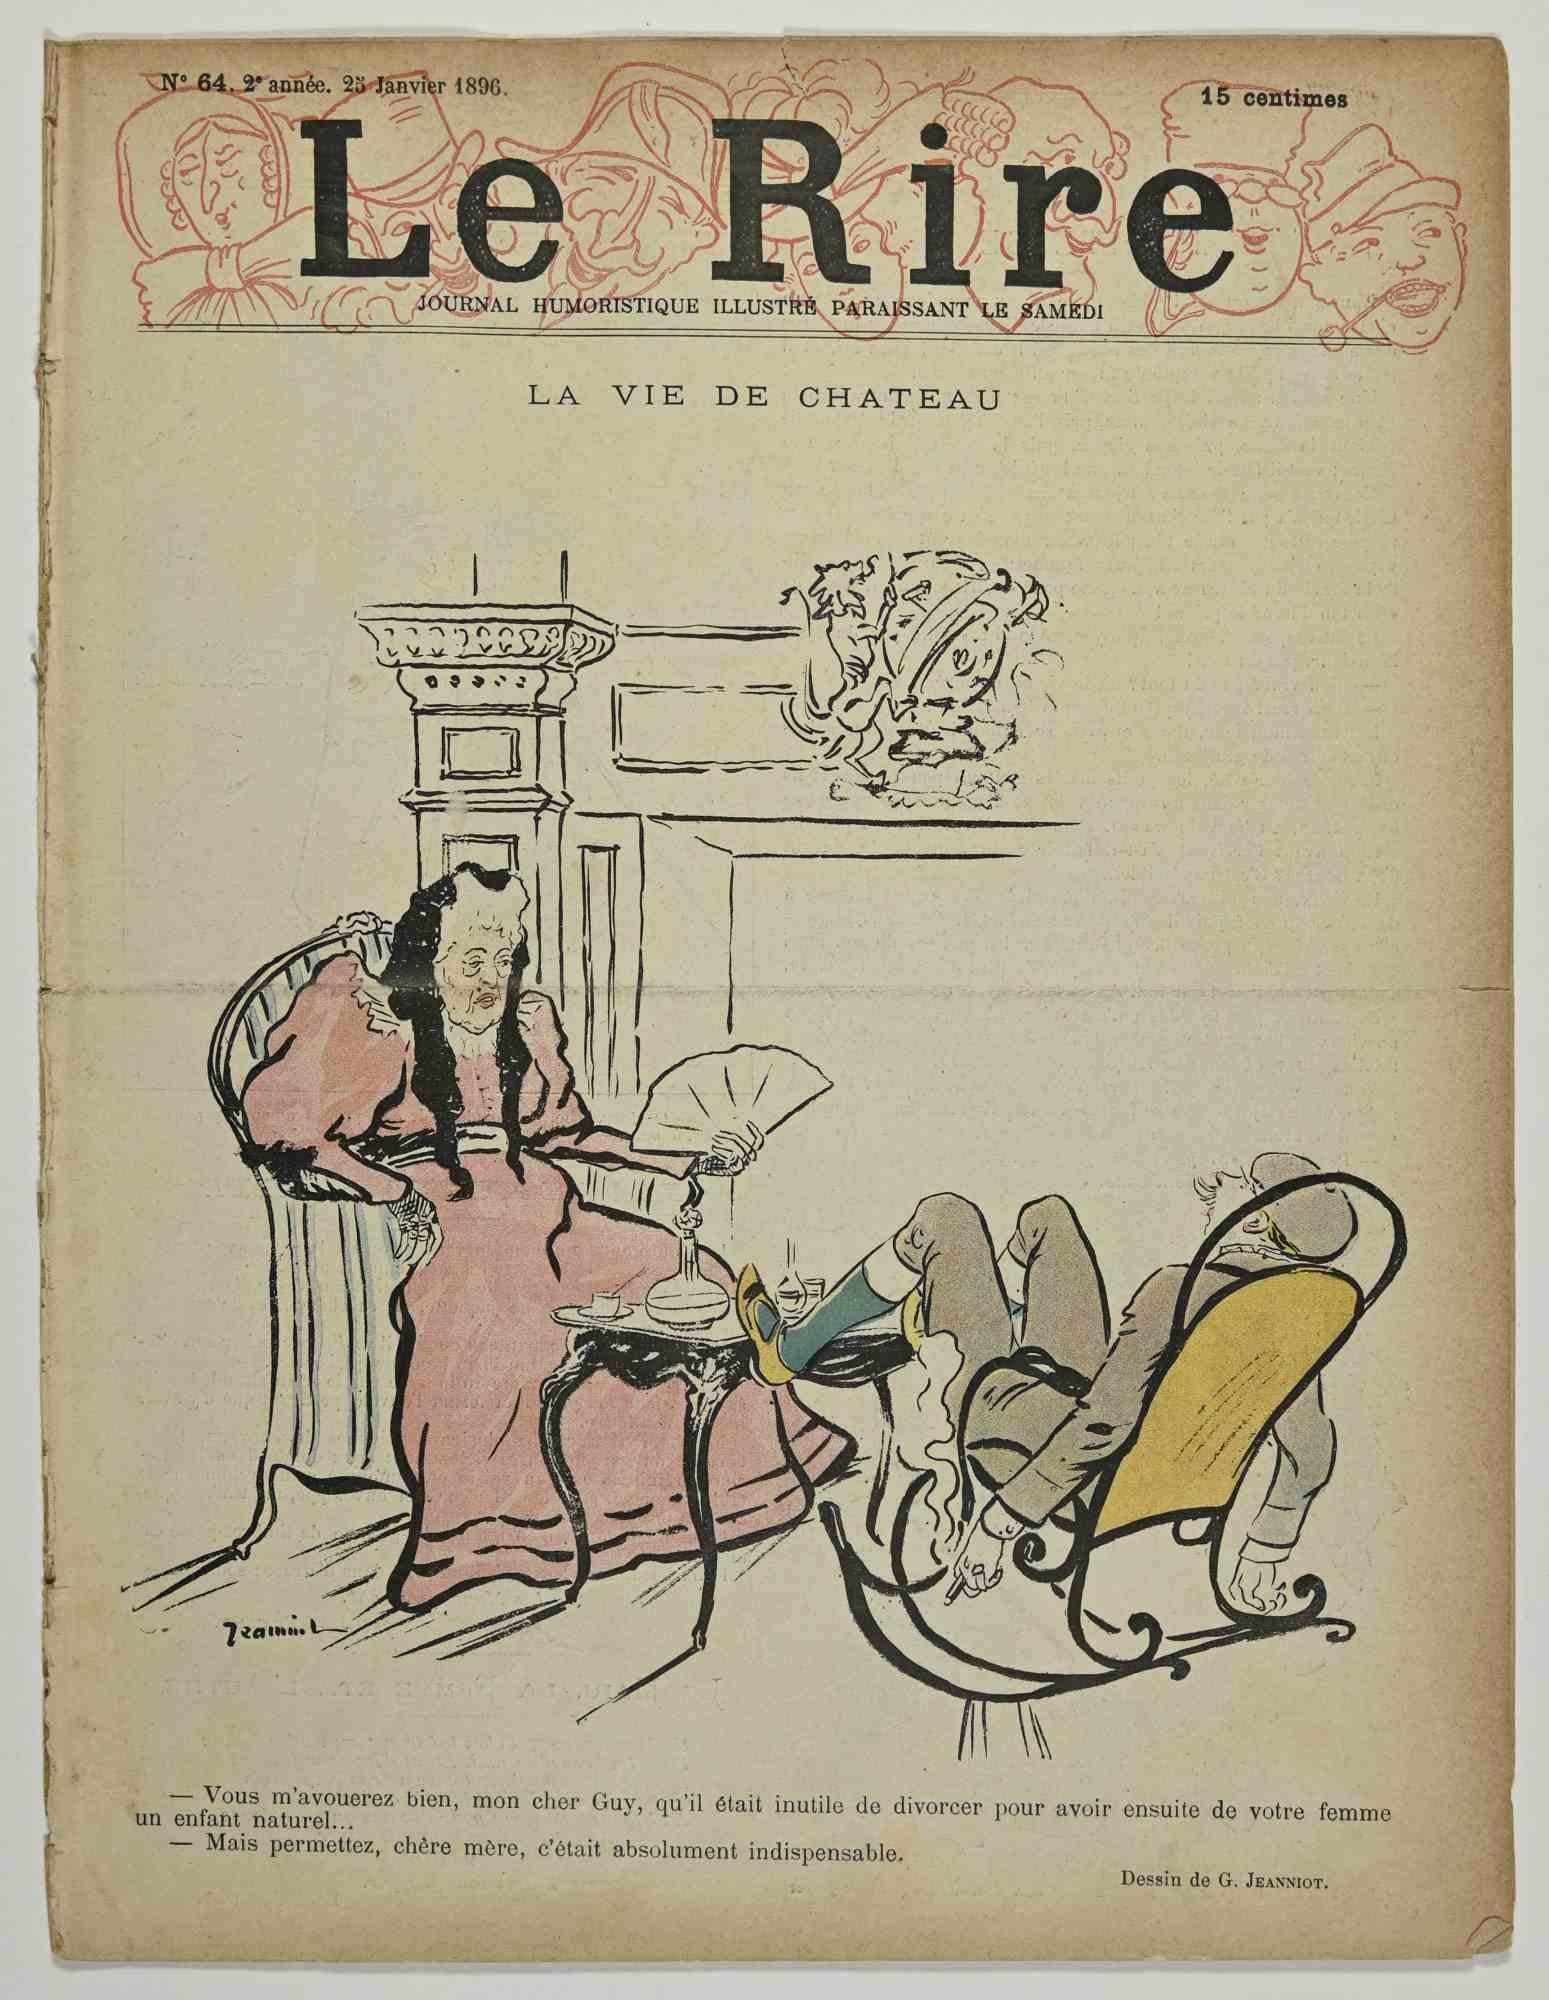 Le Rire is a Comic Magazine published in 1896, reproducing  in lithographs the drawings by Pierre-Georges Jeanniot (1848–1934).

